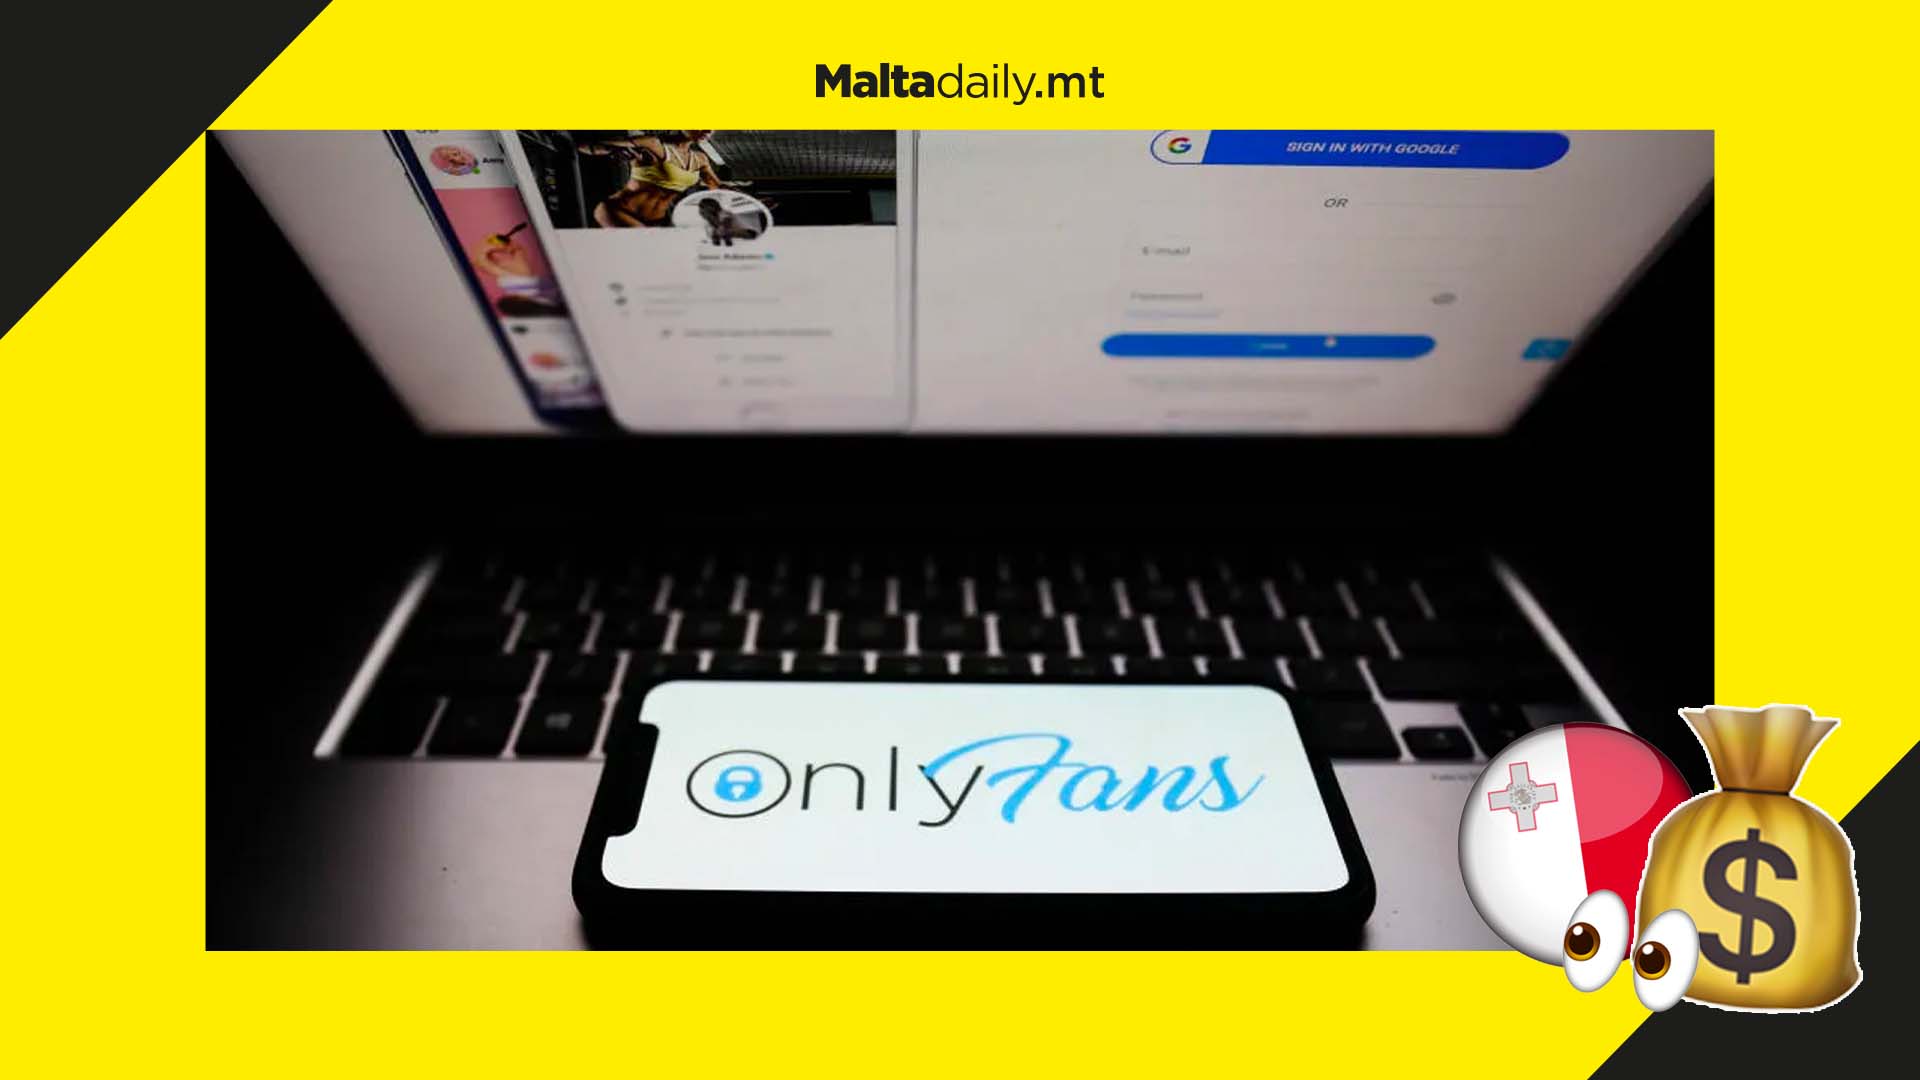 OnlyFans owner made $500 million in 2 years as Maltese creators also benefit